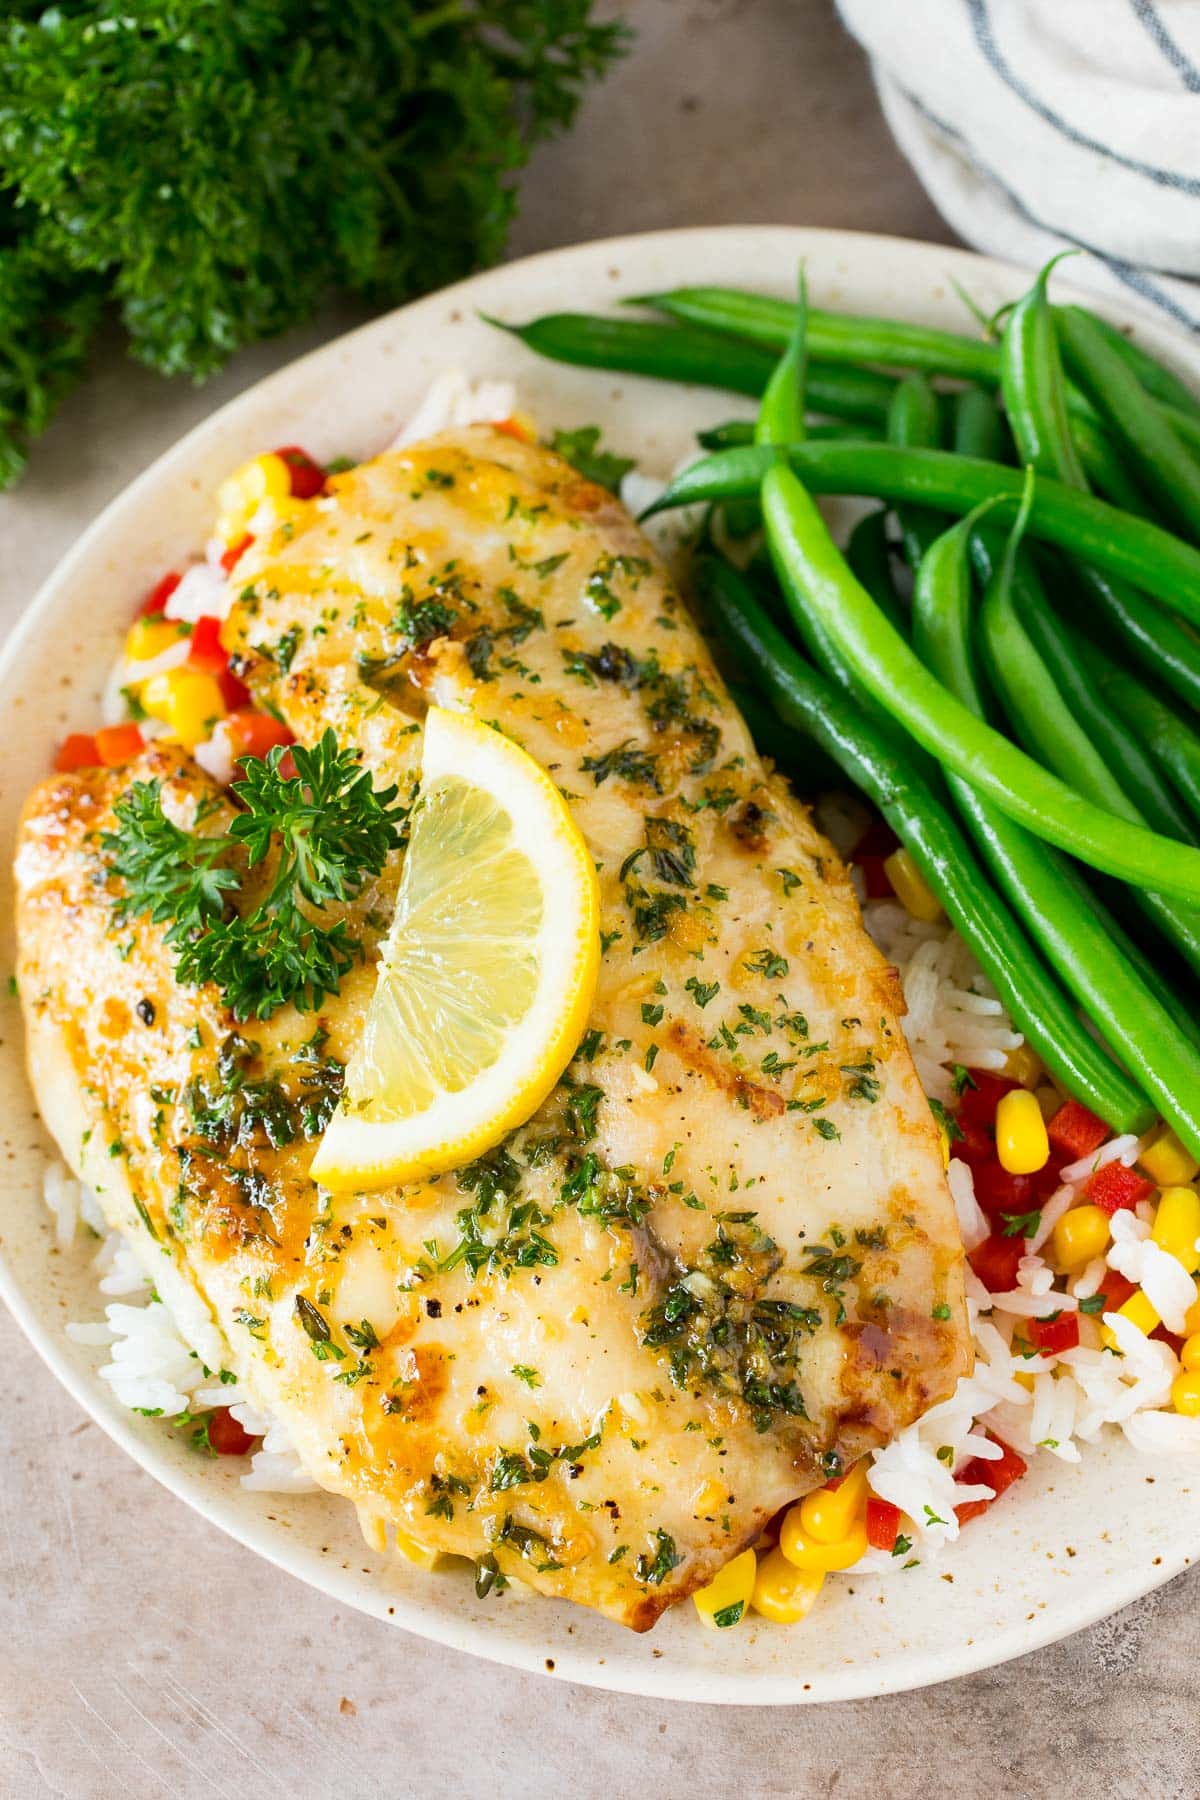 Baked tilapia served with rice and green beans.